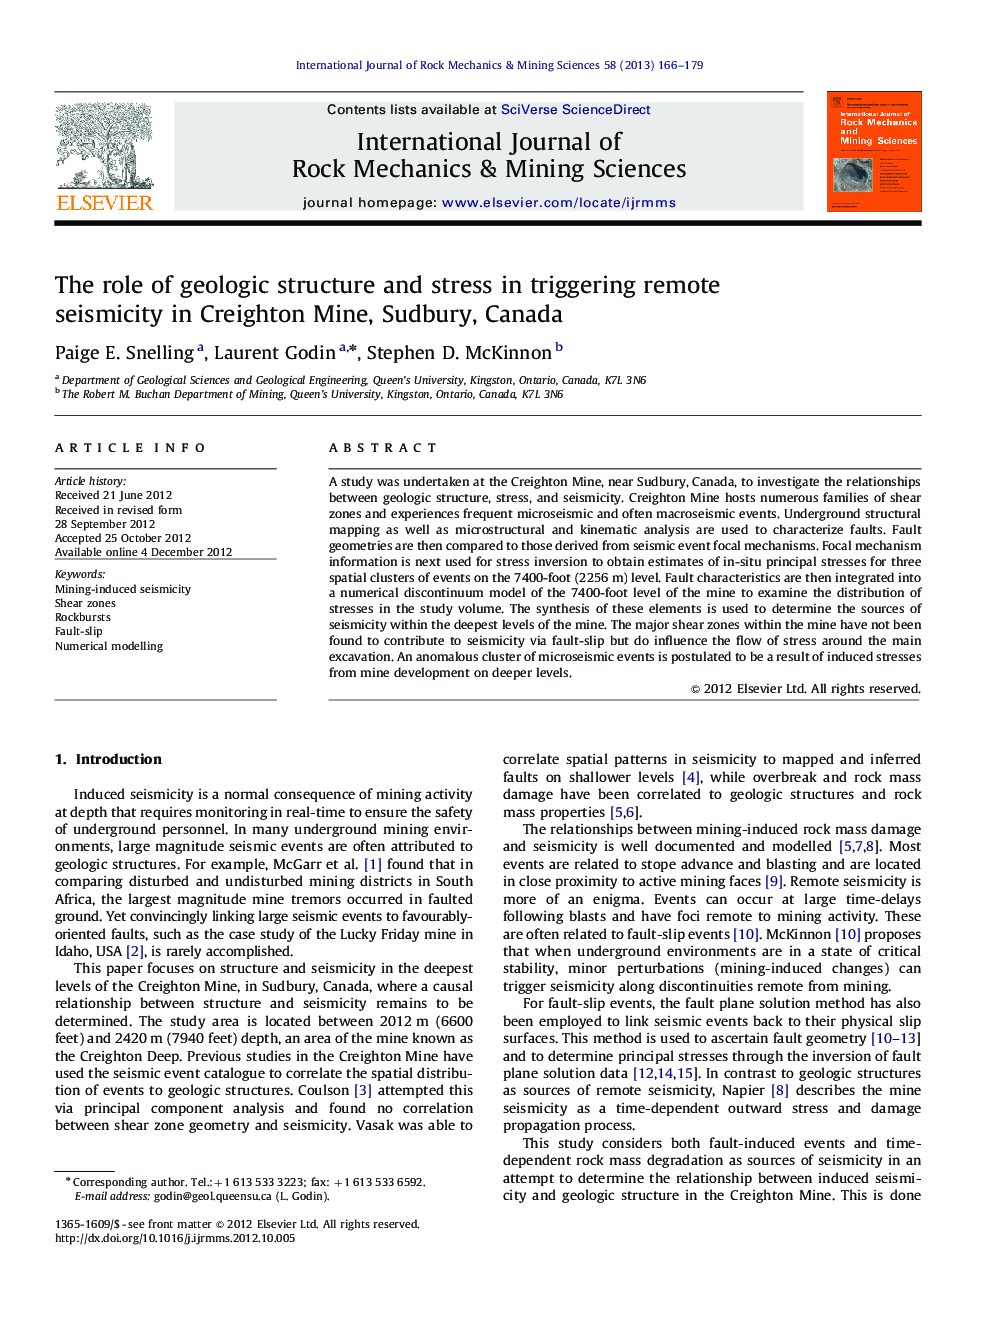 The role of geologic structure and stress in triggering remote seismicity in Creighton Mine, Sudbury, Canada